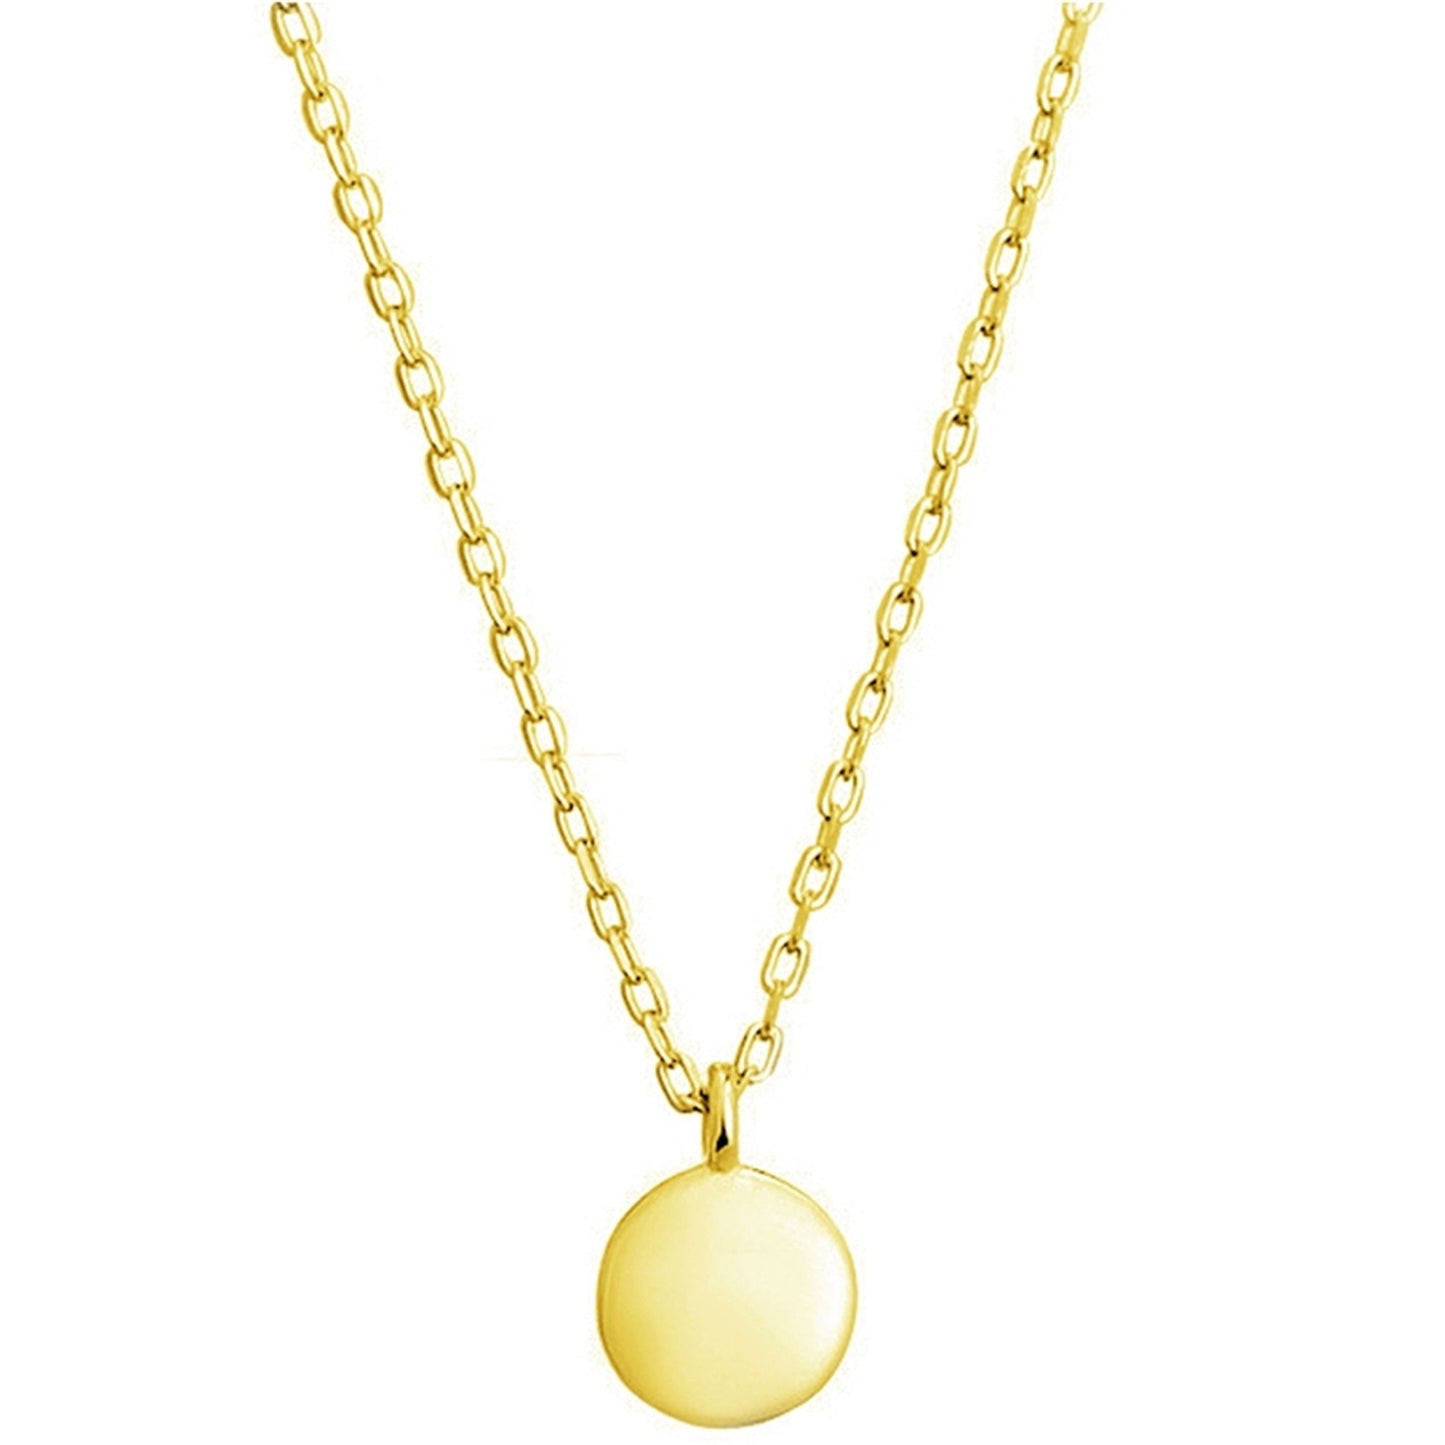 Sterling Silver Disc Necklace with Pebble Finish and Gold Plated Chain - sugarkittenlondon